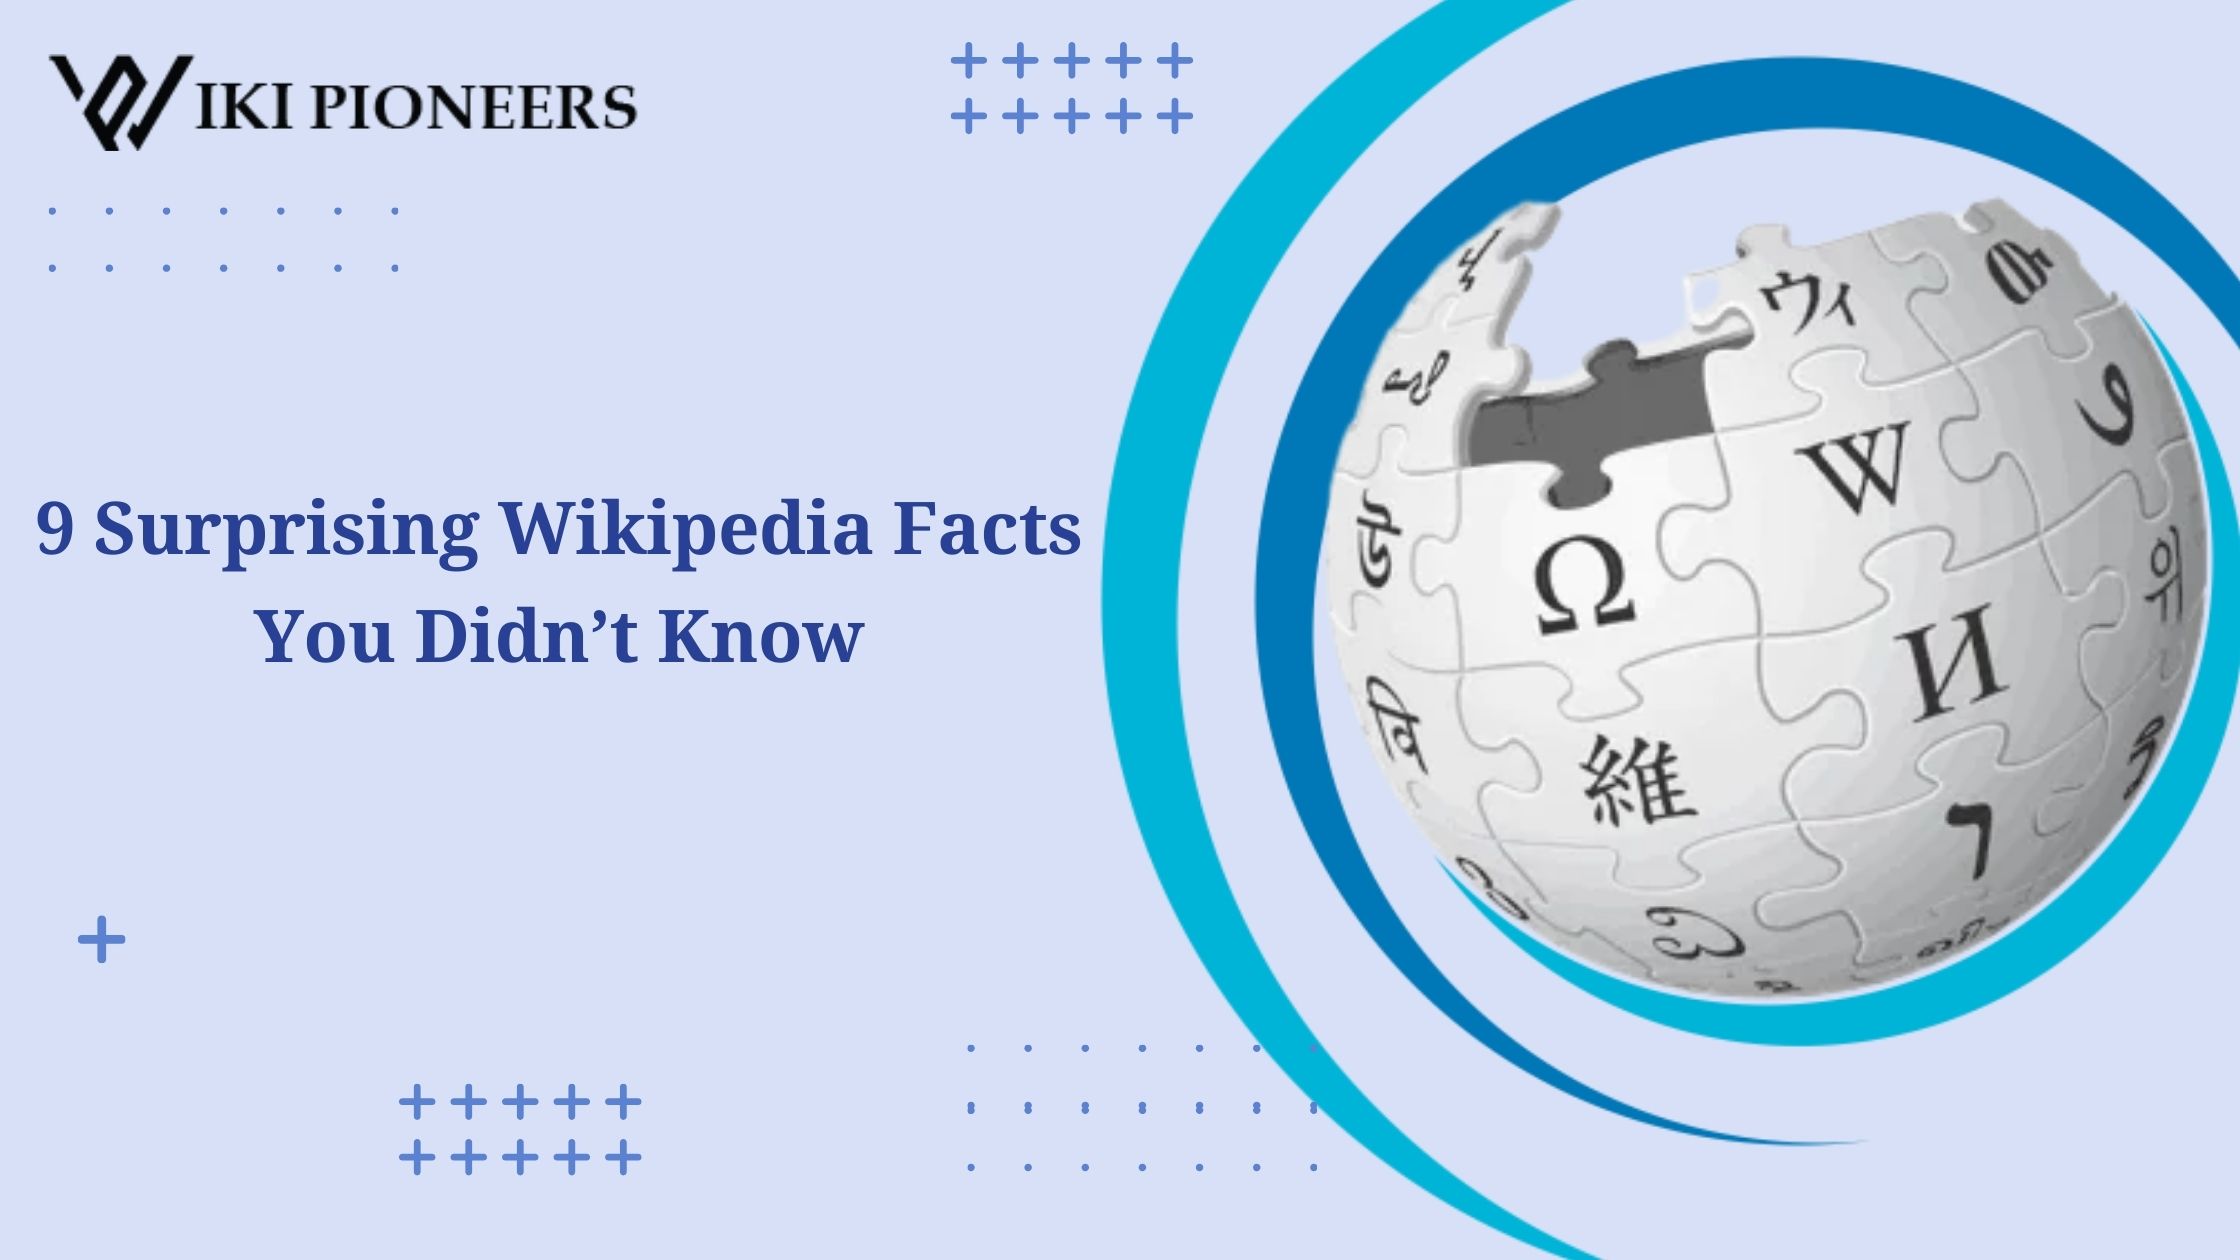 9 Surprising Wikipedia Facts You Didn’t Know